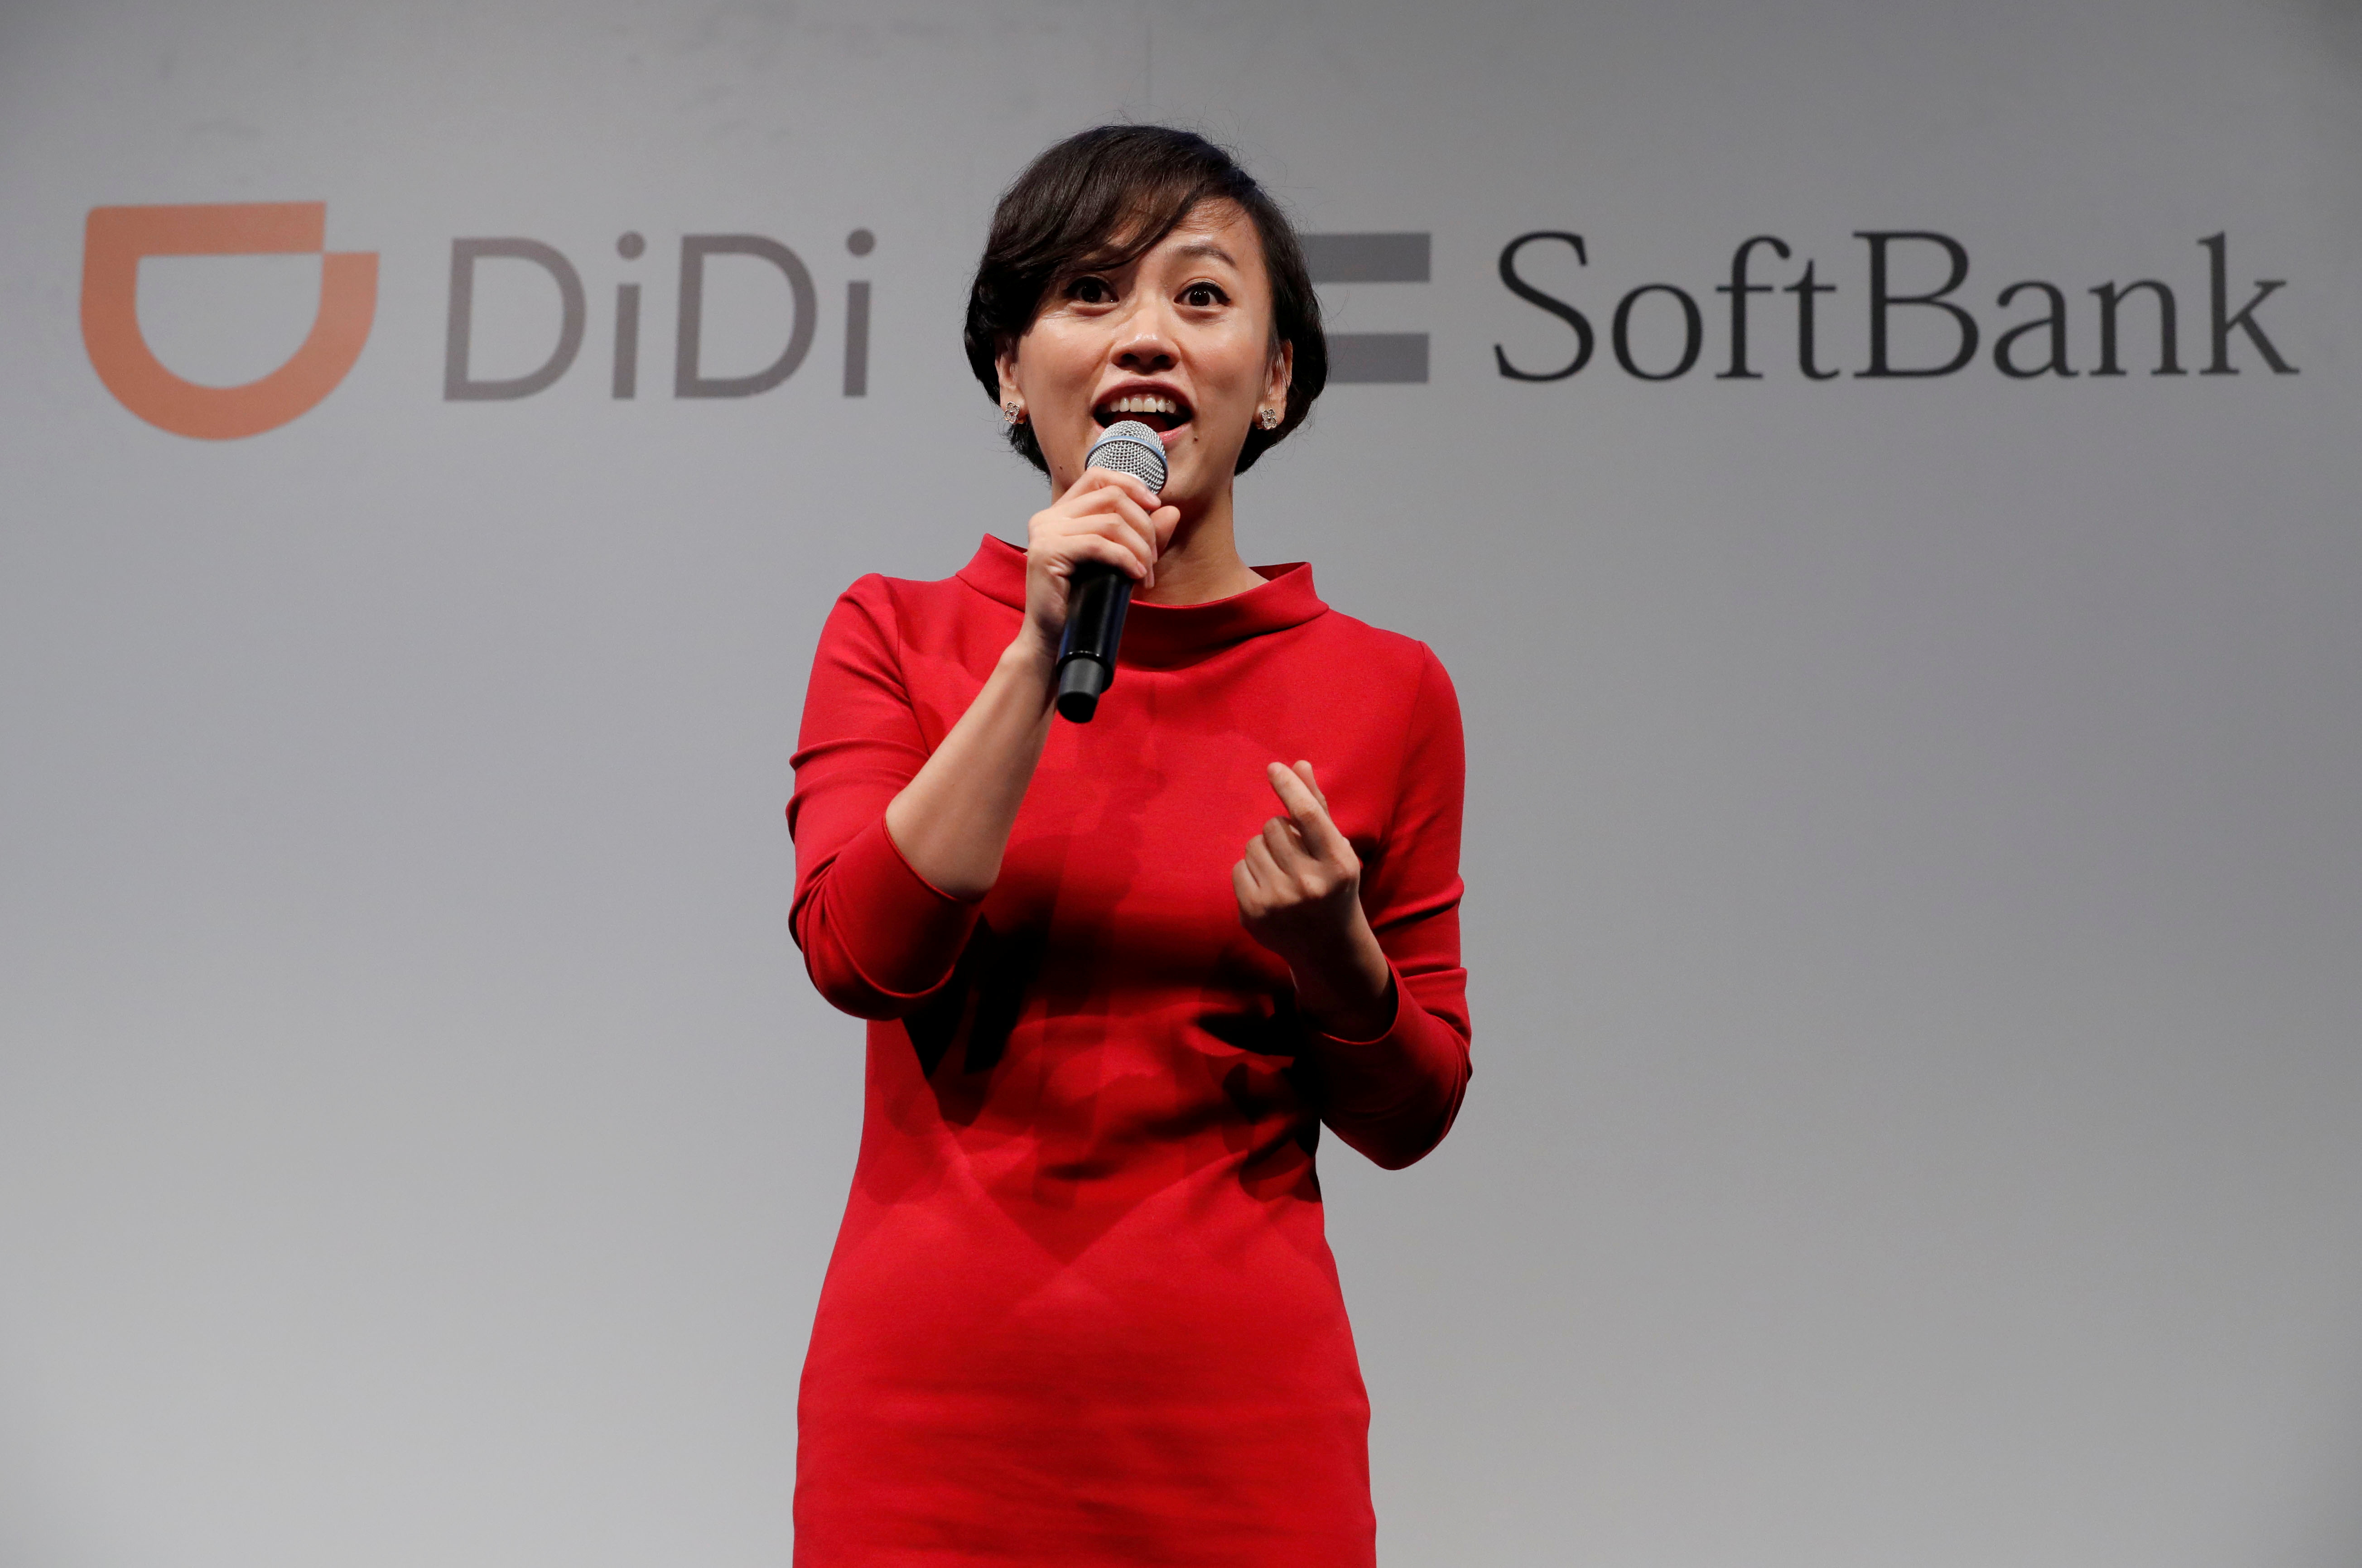 President of Didi Chuxing Jean Liu speaks during a news conference about their Japanese taxi-hailing joint venture in Tokyo